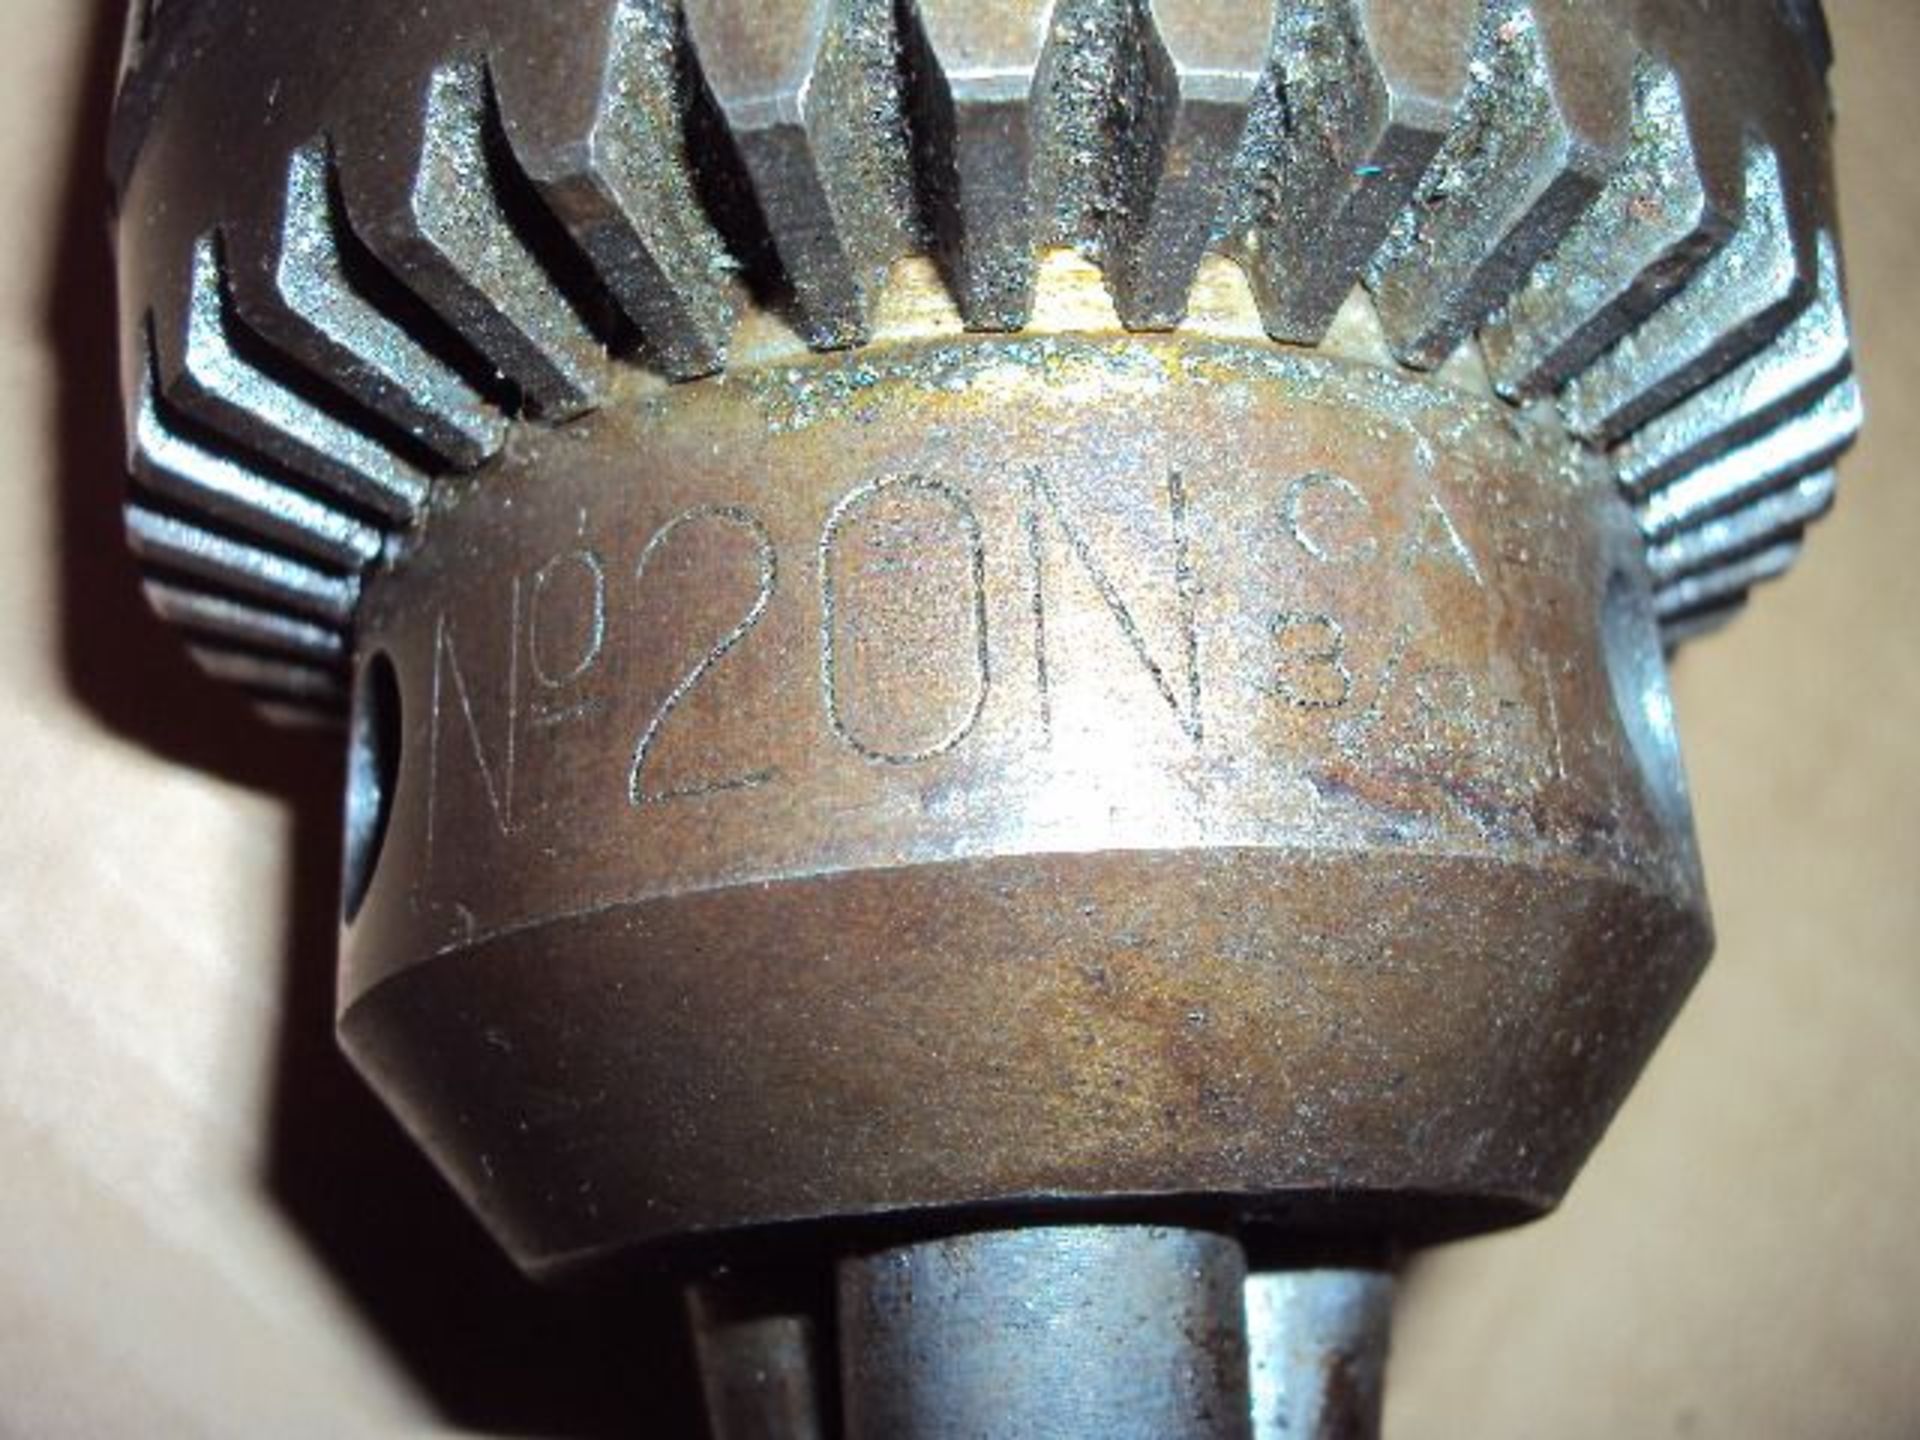 Jacobs No. 20N Super Ball Bearing Drill Chuck with Jacobs MT5 Shank - Image 3 of 6